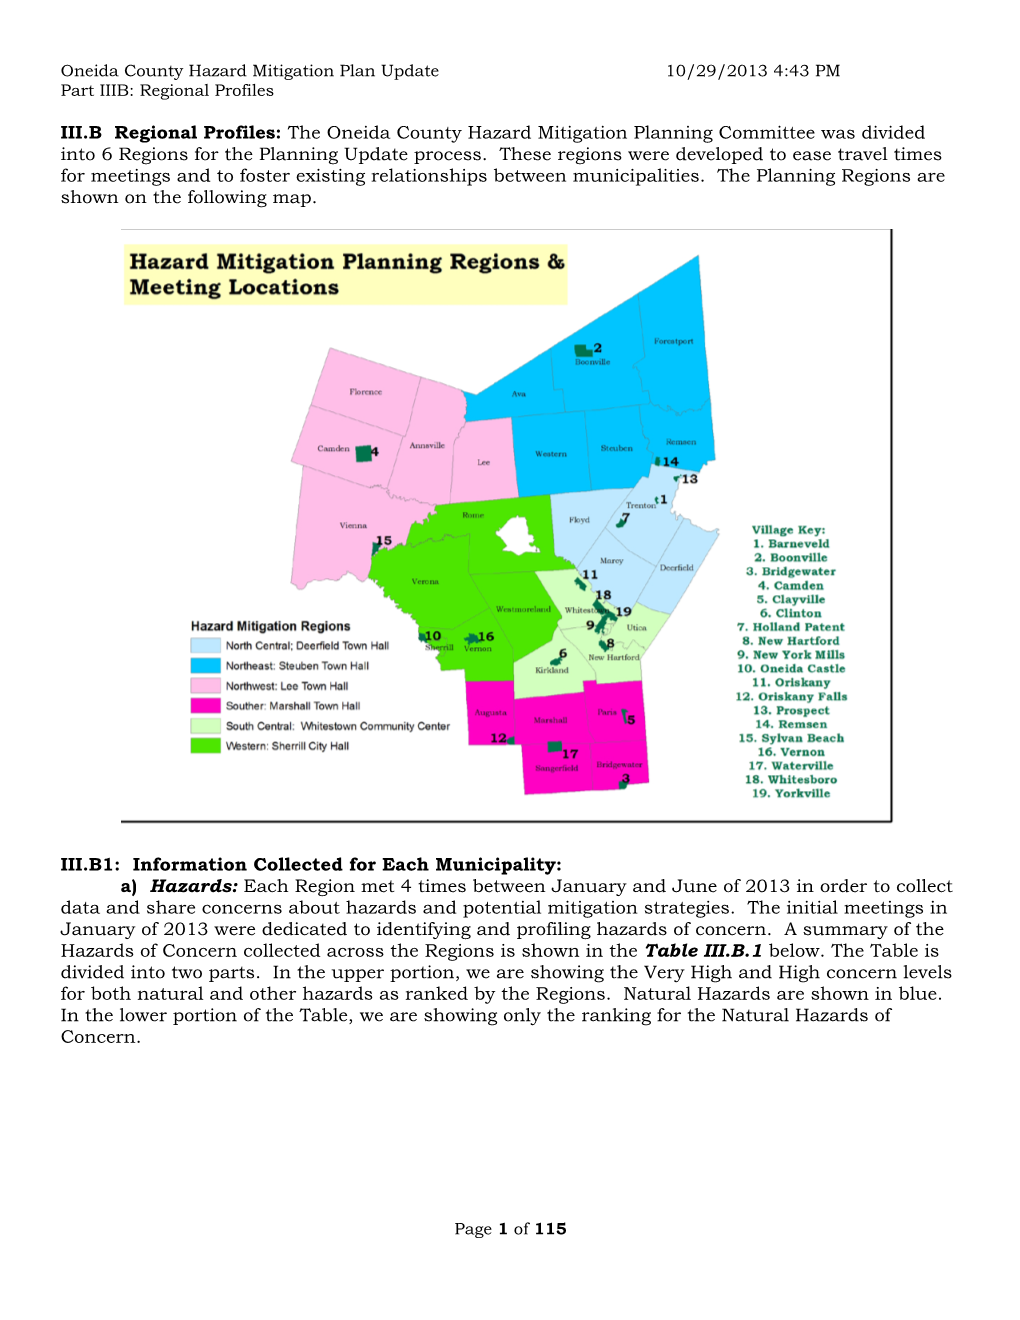 III.B Regional Profiles: the Oneida County Hazard Mitigation Planning Committee Was Divided Into 6 Regions for the Planning Update Process